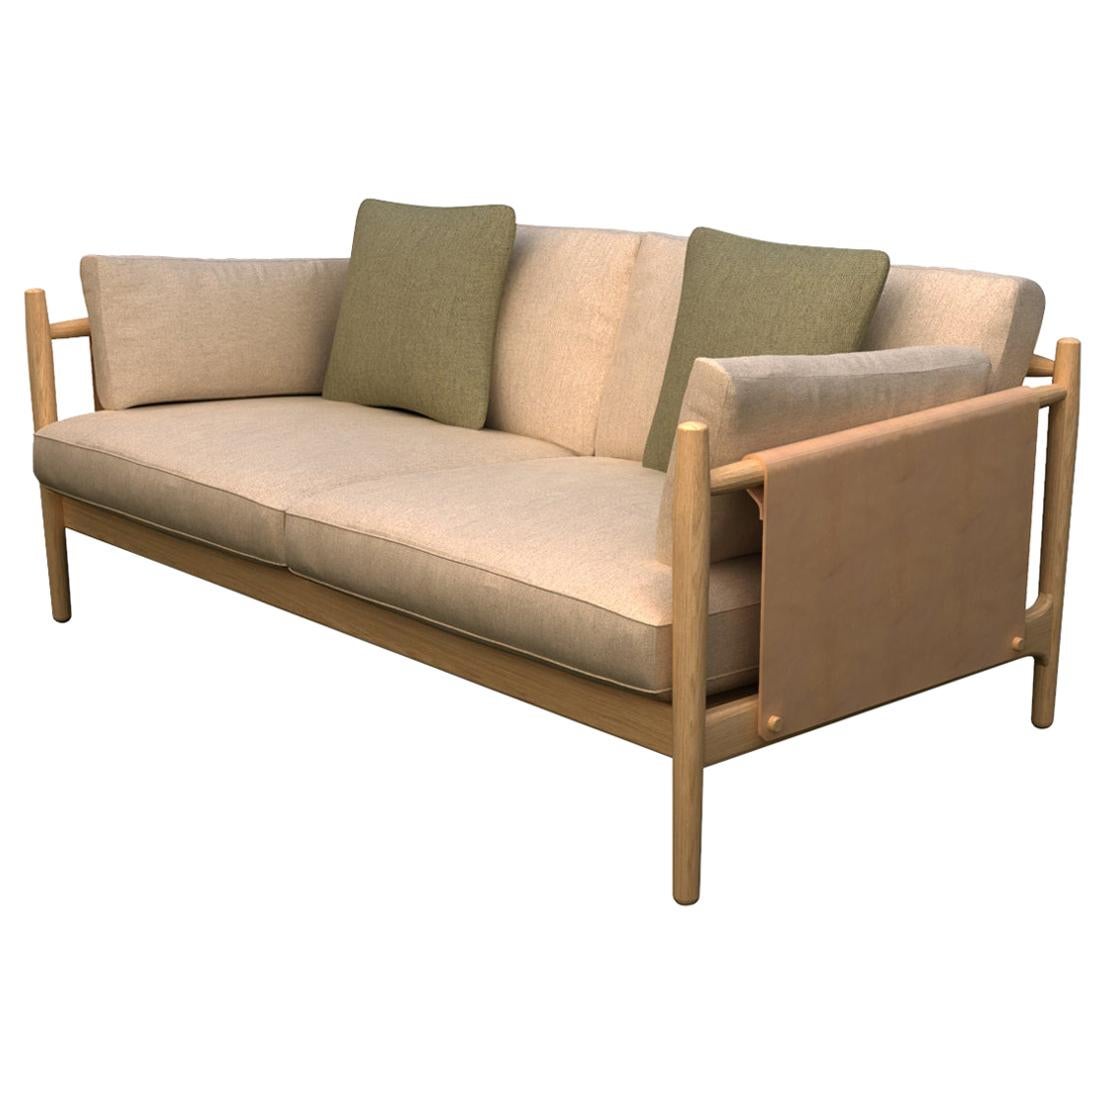 Citlal Two-Seat Sofa Solid Wood, Fabric and Leather, Contemporary Design